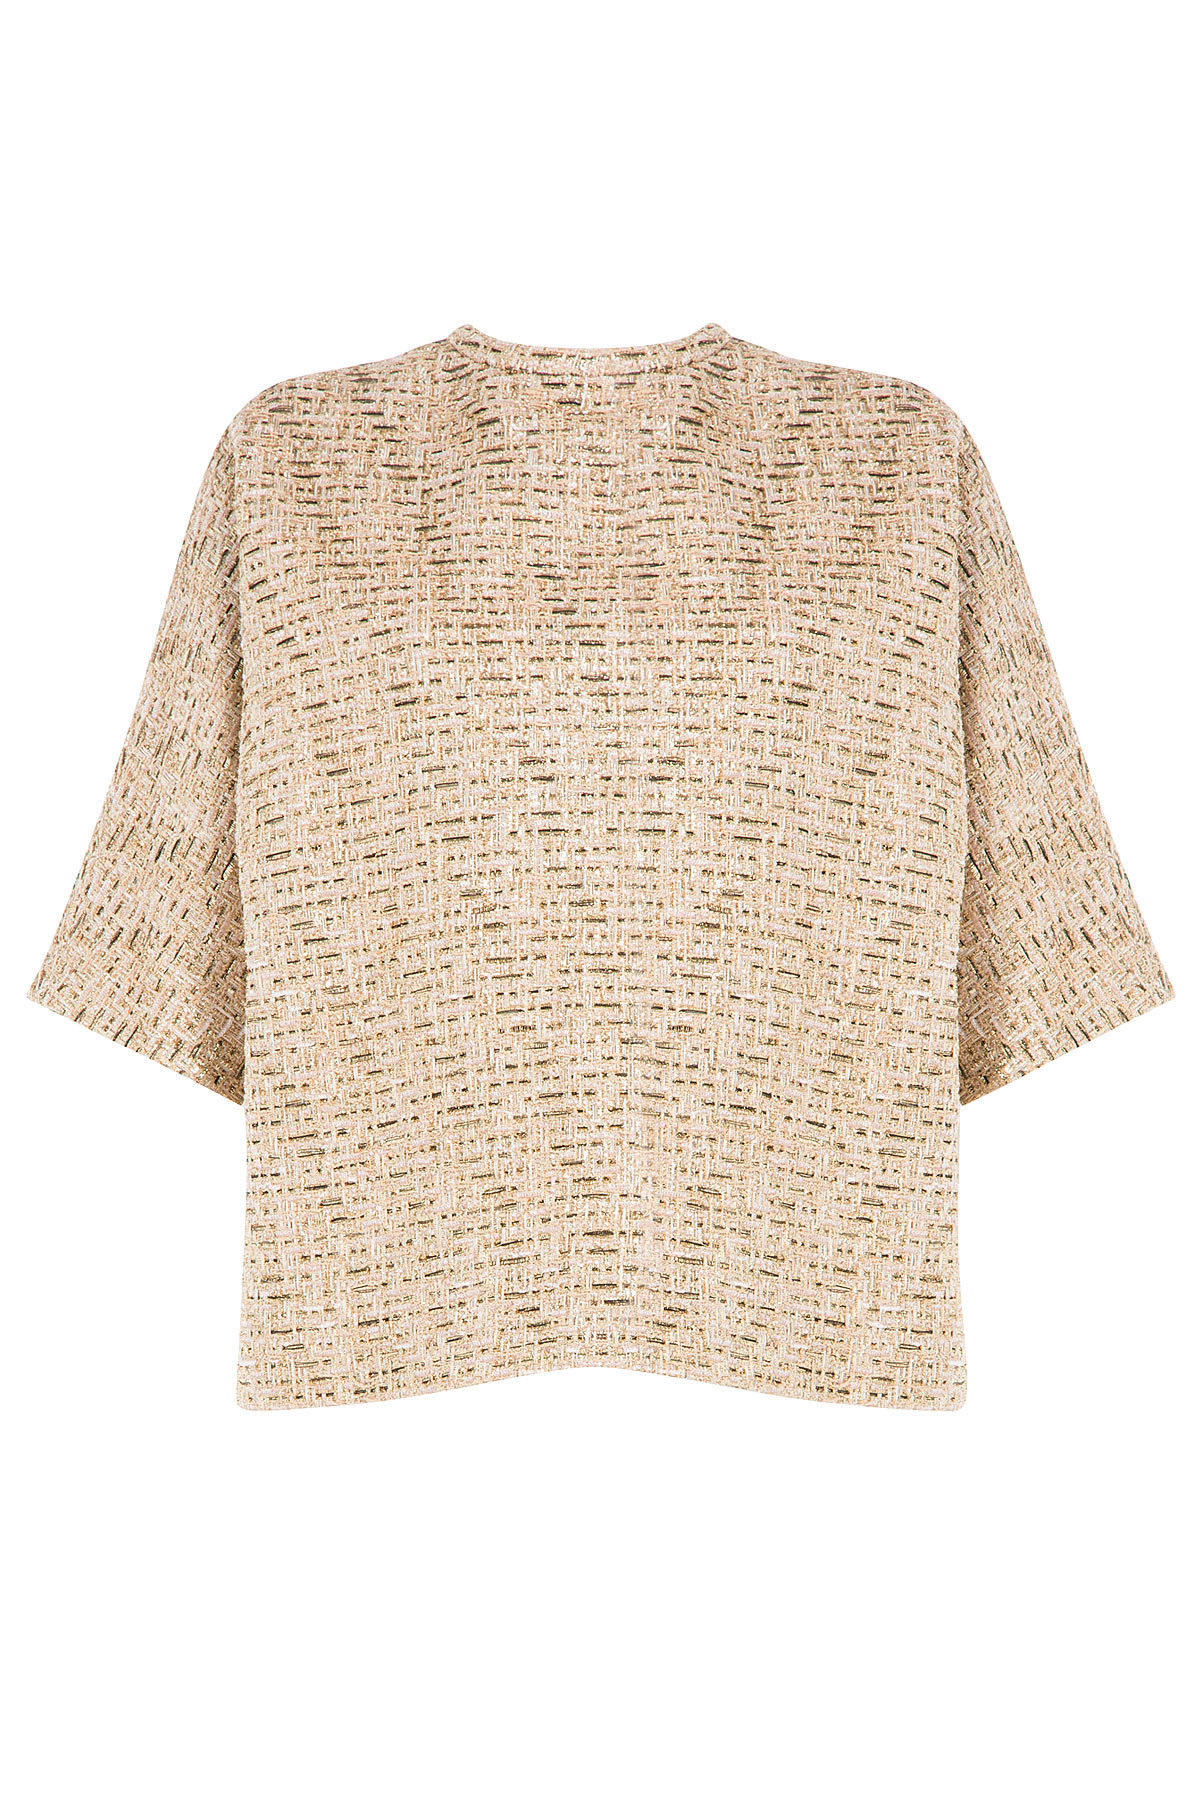 Woven Boucle Top by Rochas